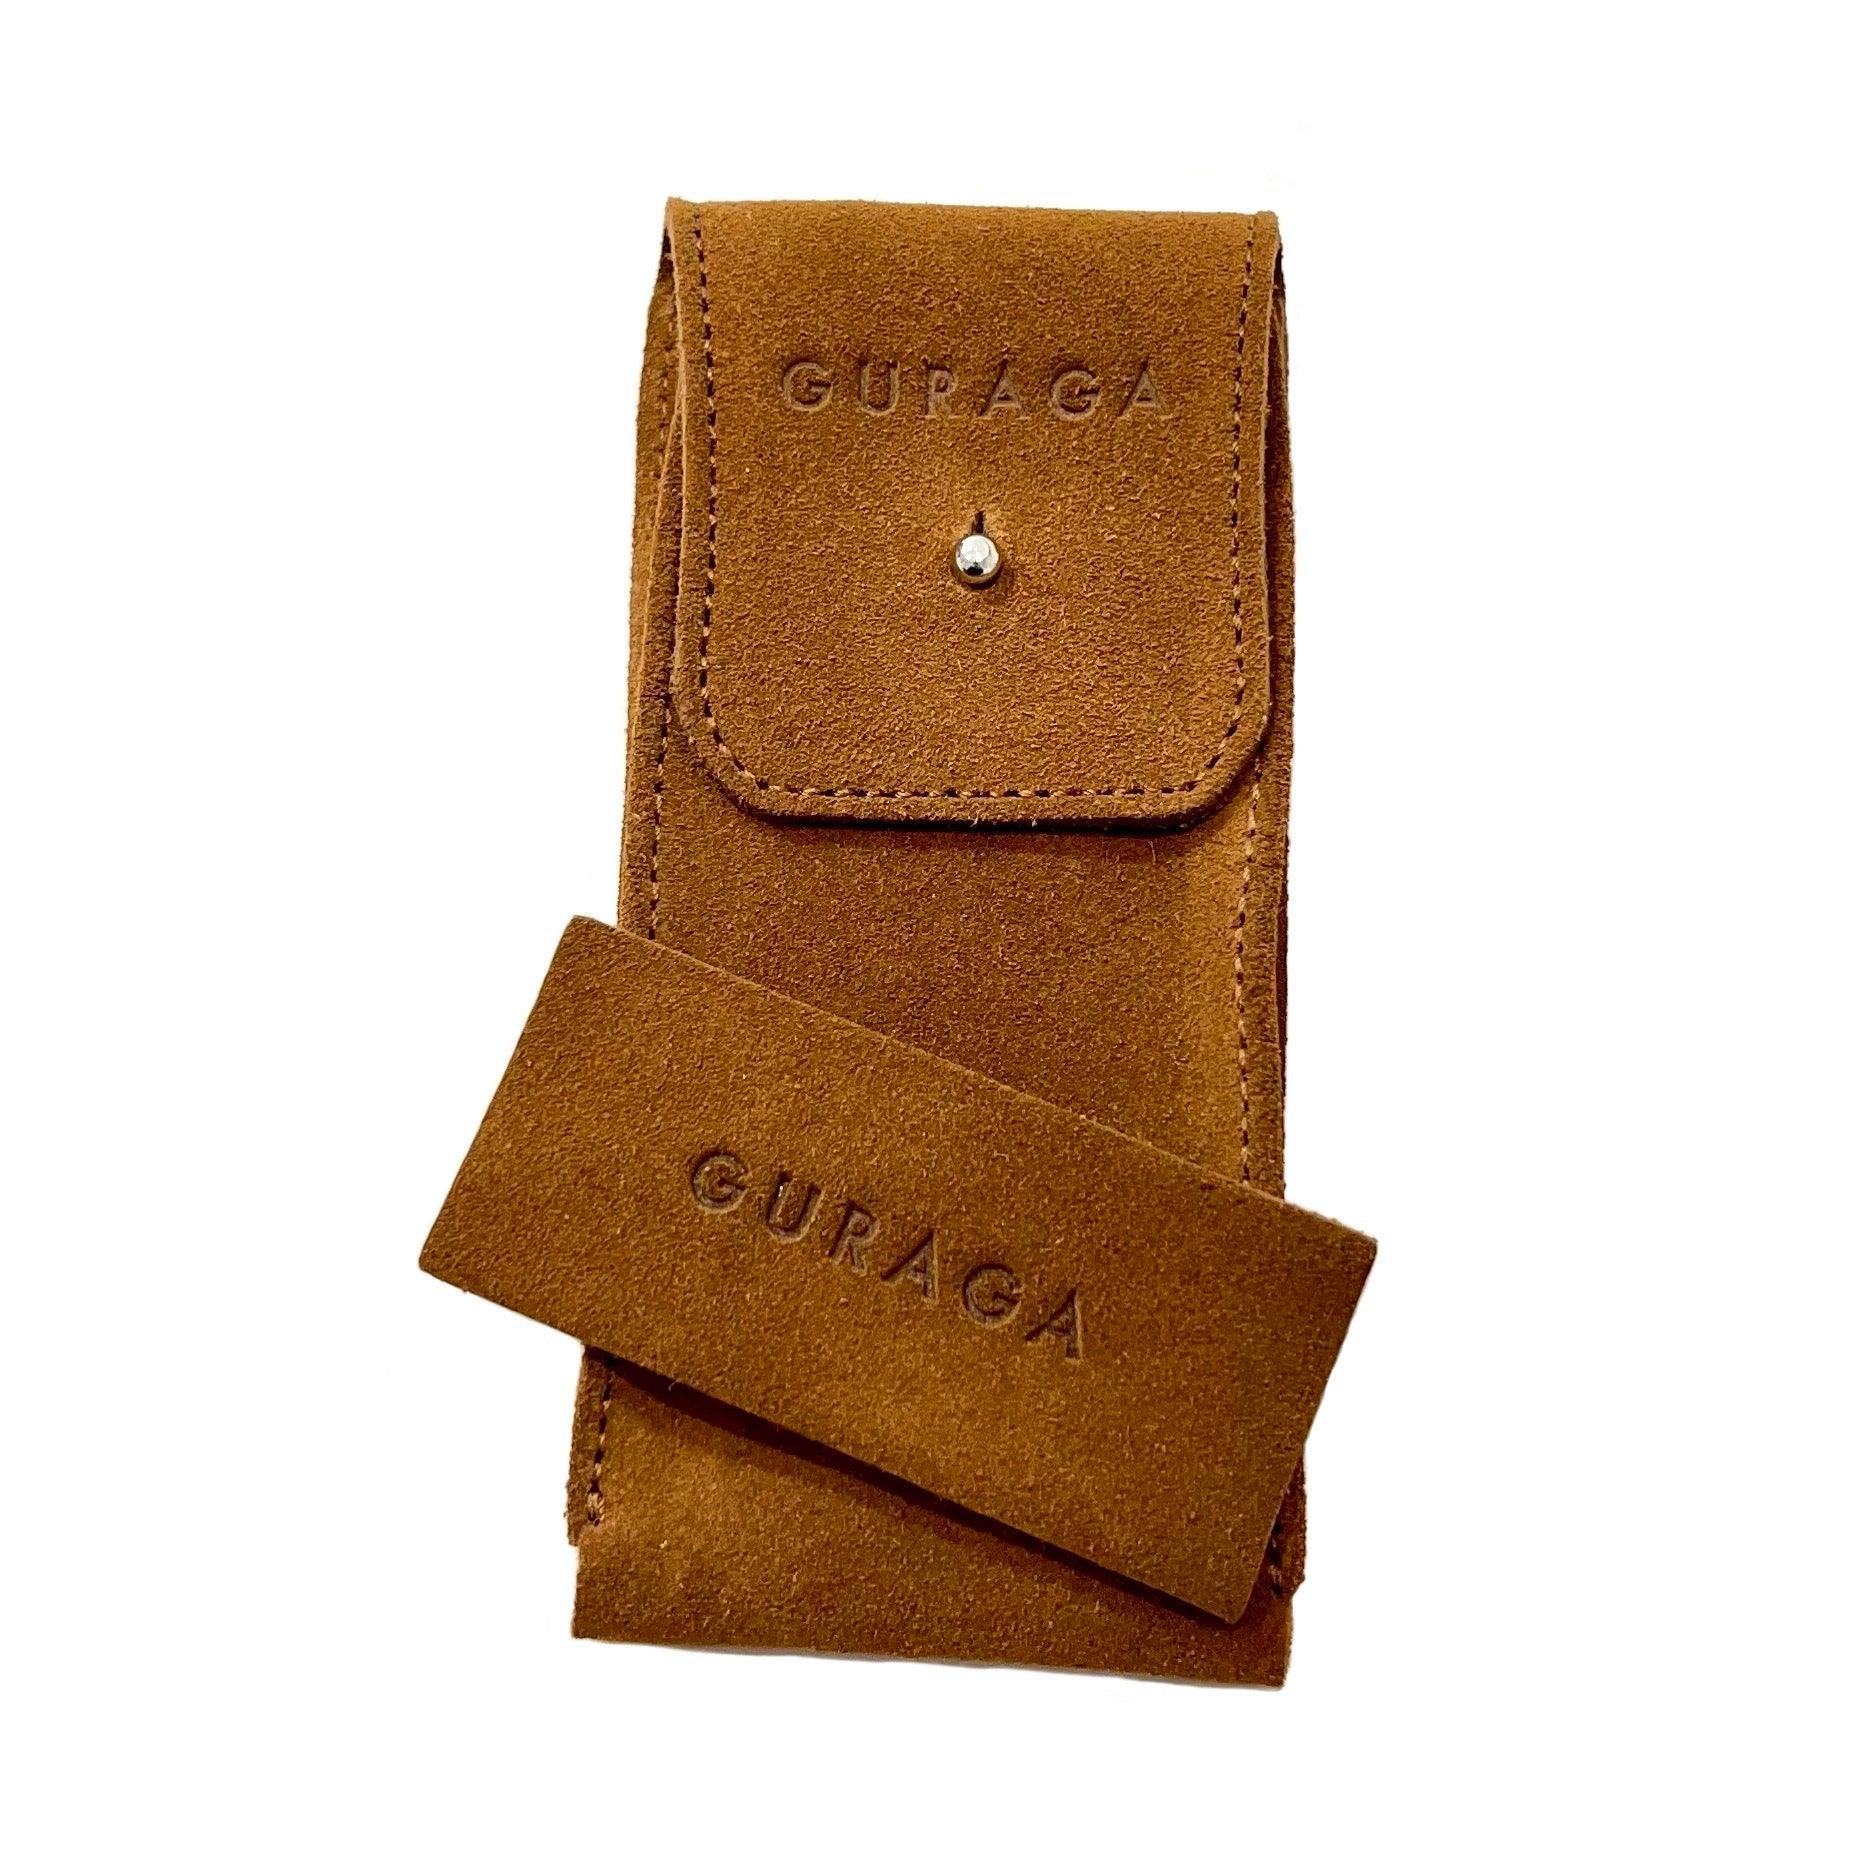 Cognac Brown Suede Leather Watch Pouch - Guraga